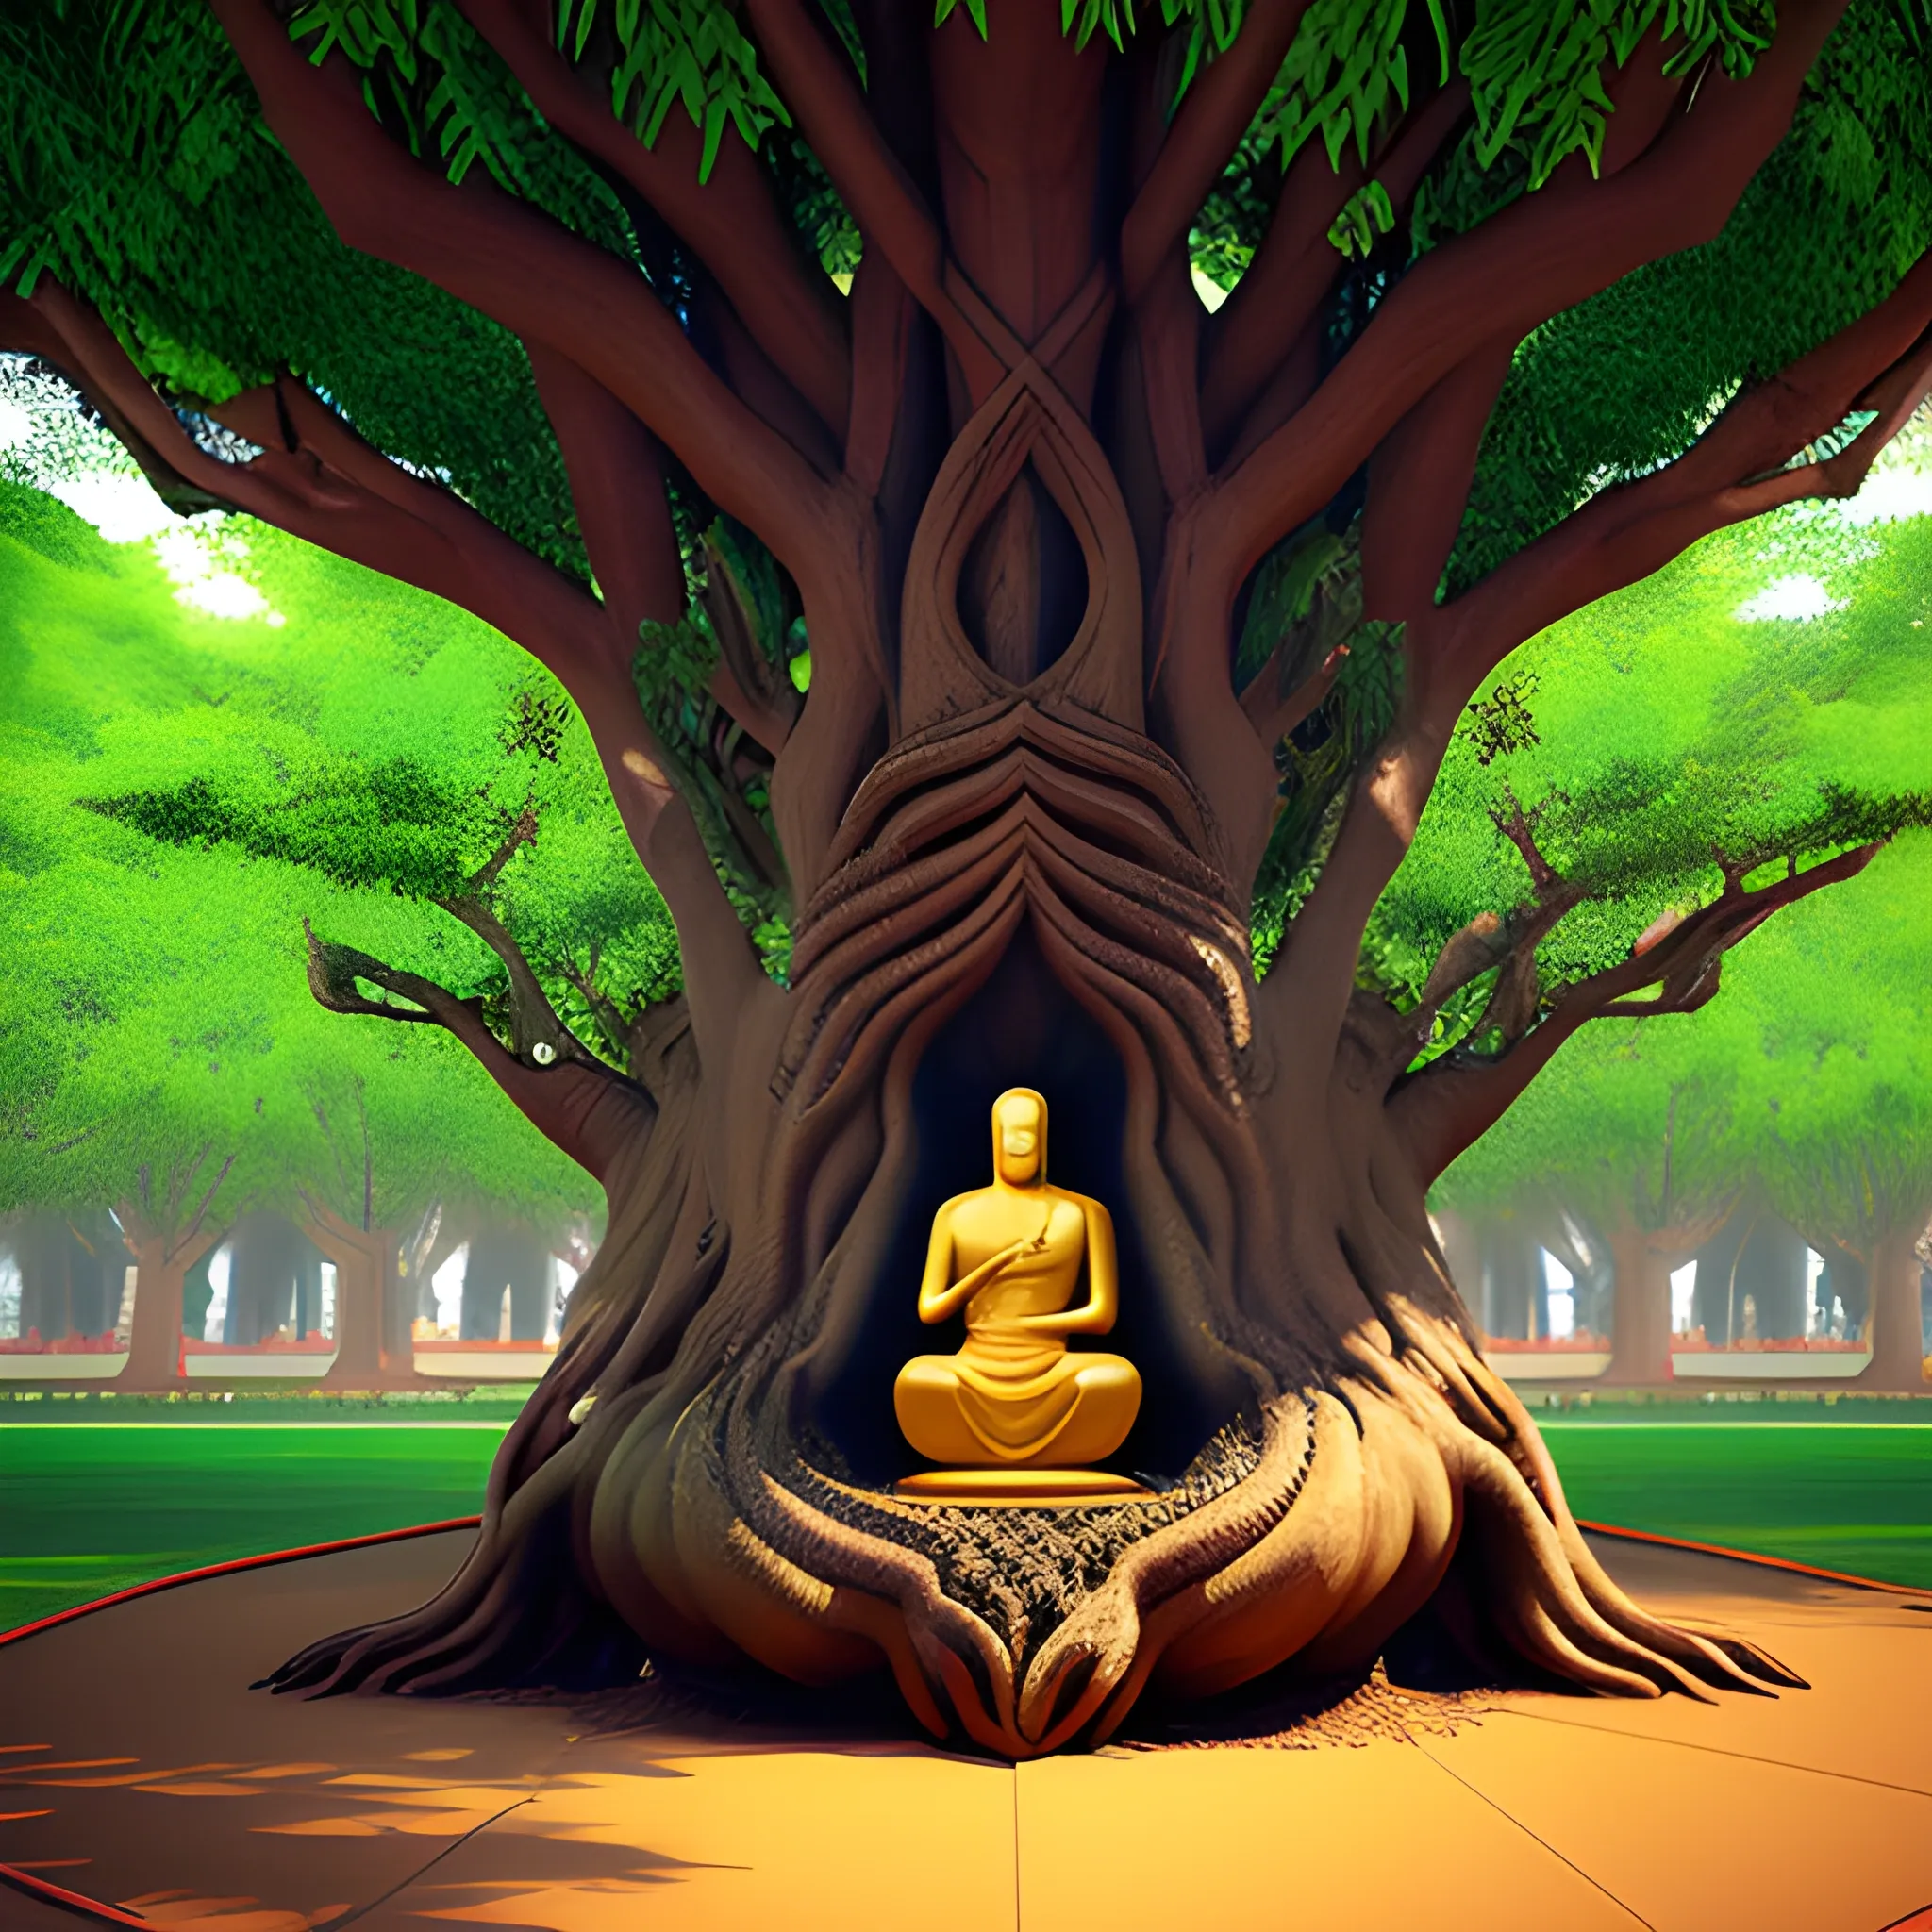 Create a realistic 3D illustration of an animated lord Budha character sitting casually under a Banyan Tree with their students.